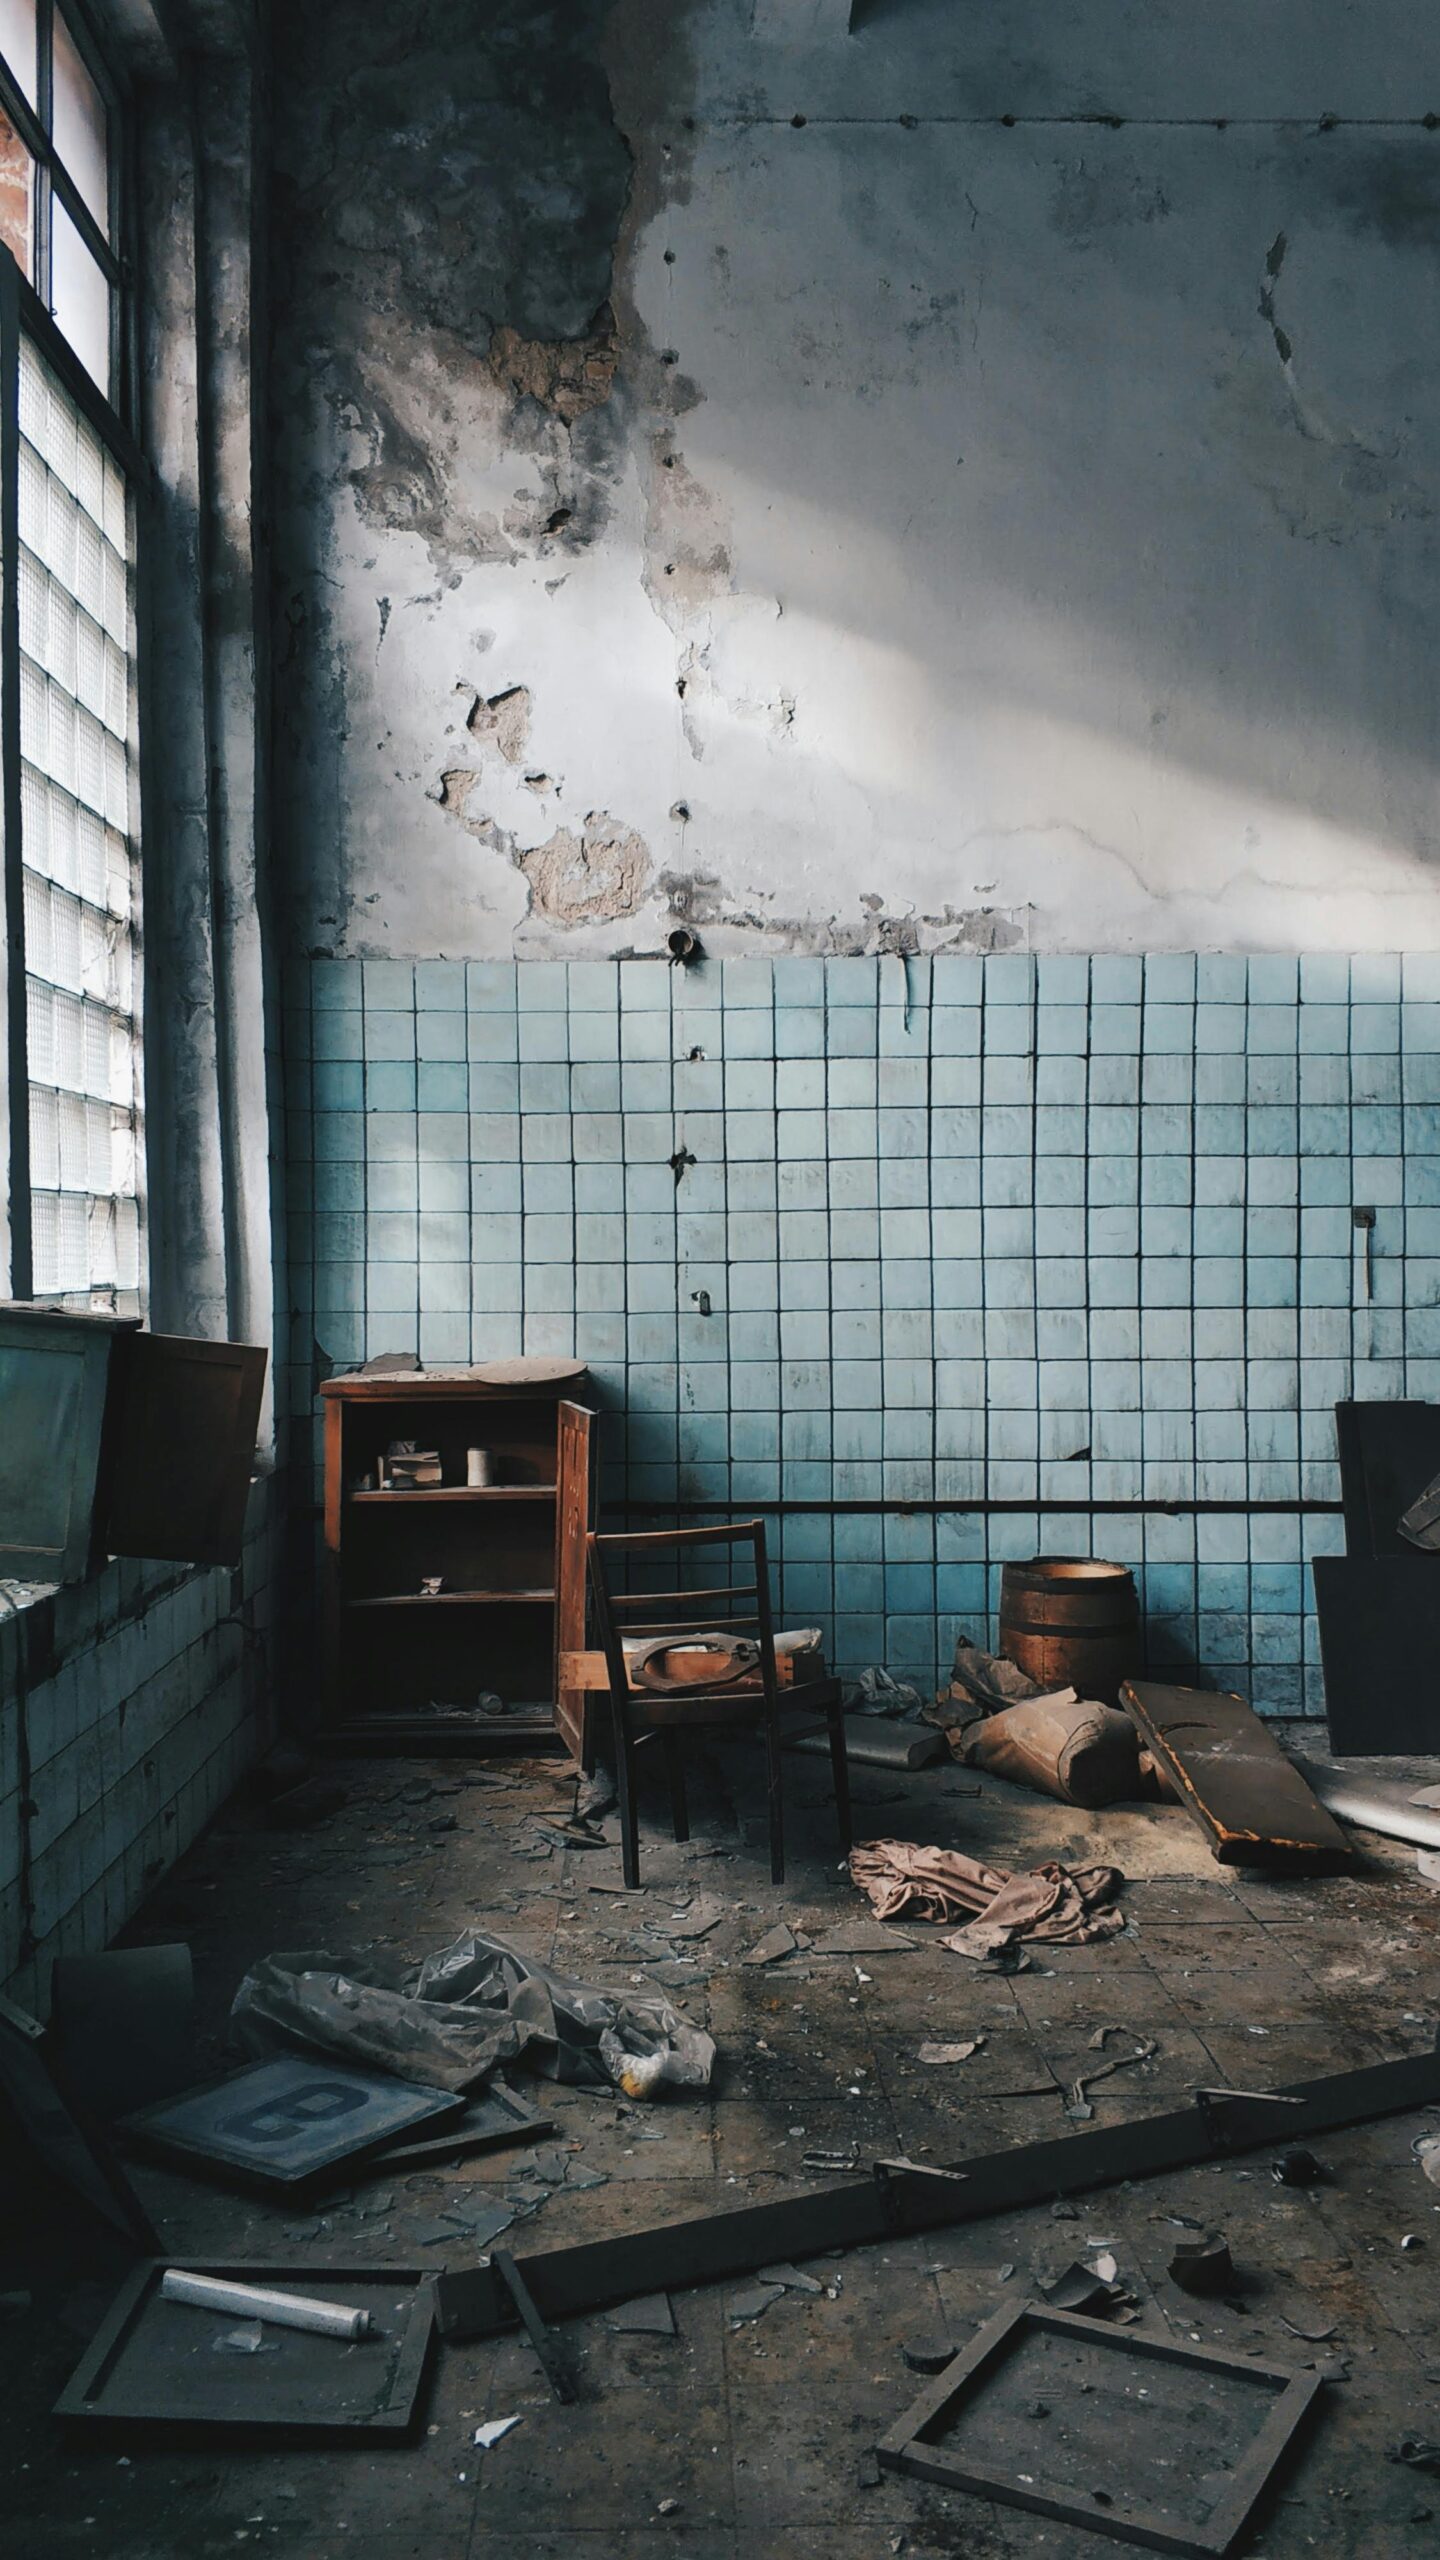 An abandoned room with debris and old furniture, in need of junk removal services.